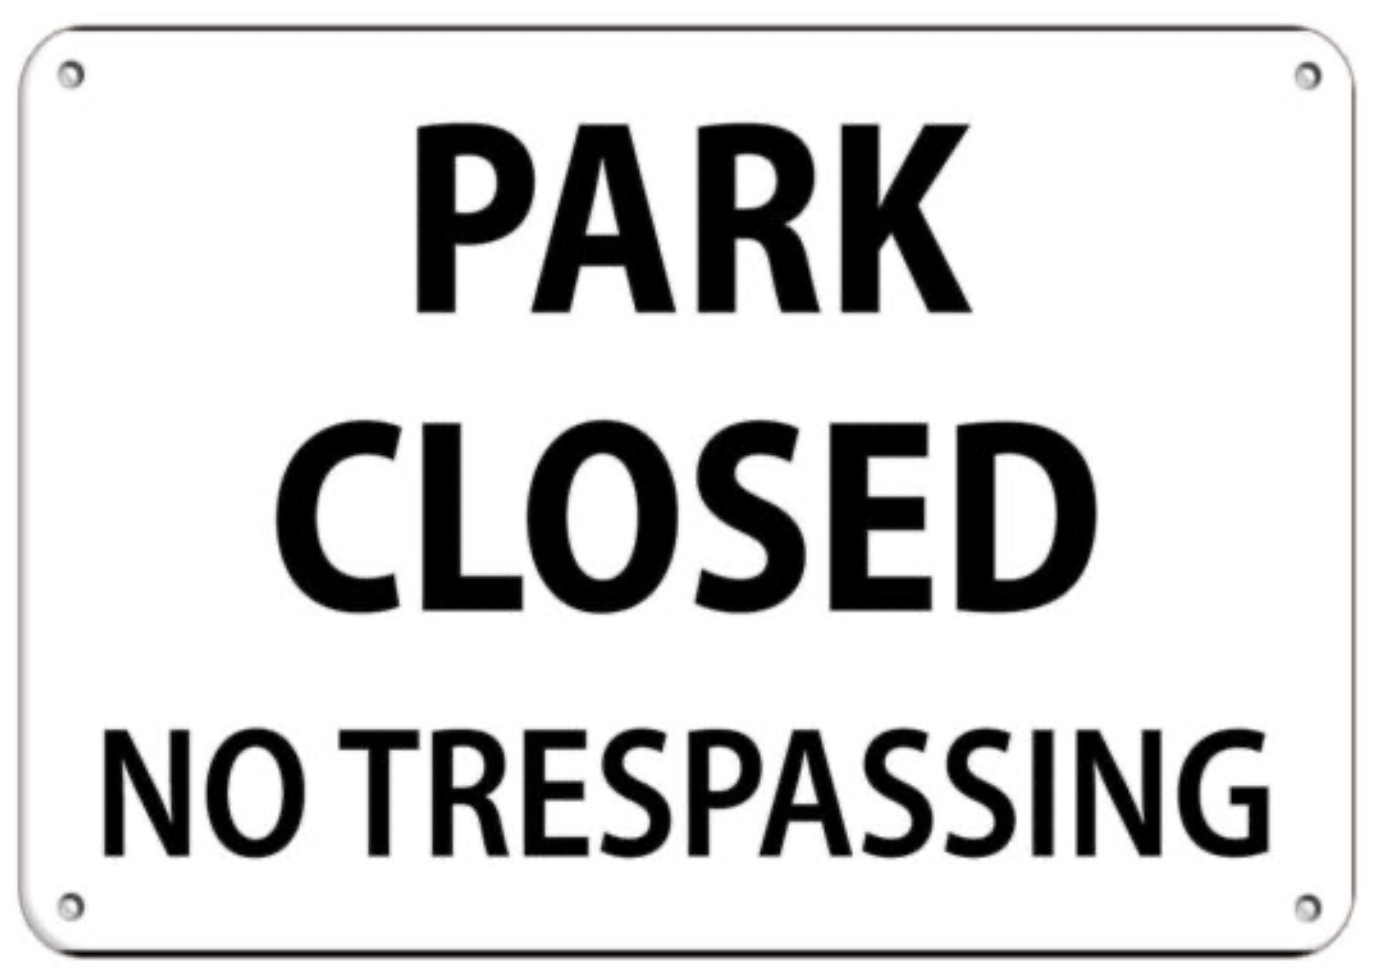 Closed parking